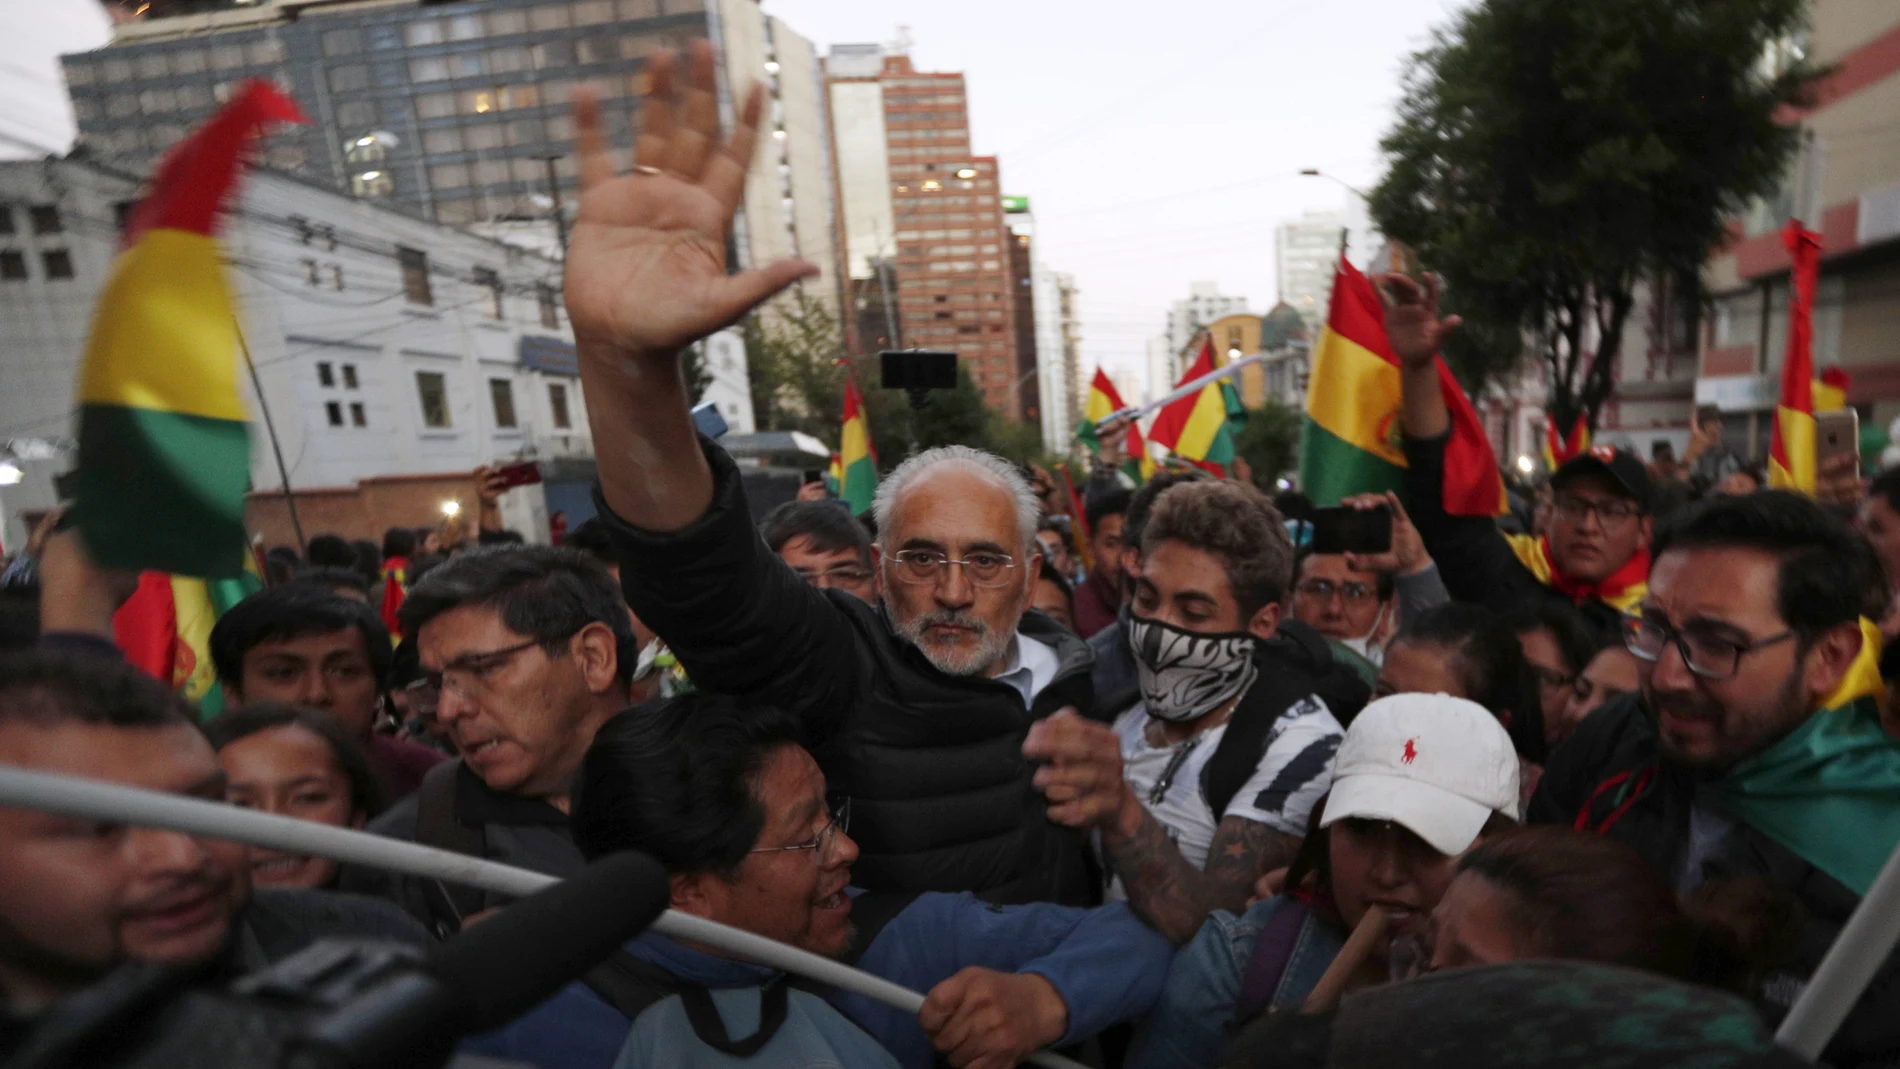 FILE - In this Oct. 22, 2019 file photo, Bolivia's opposition presidential candidate Carlos Mesa waves to supporters during an anti-government march in La Paz, Bolivia. A main candidate, Mesa draws much of his support from Bolivia's urban, more affluent population. (AP Photo/Juan Karita, File)